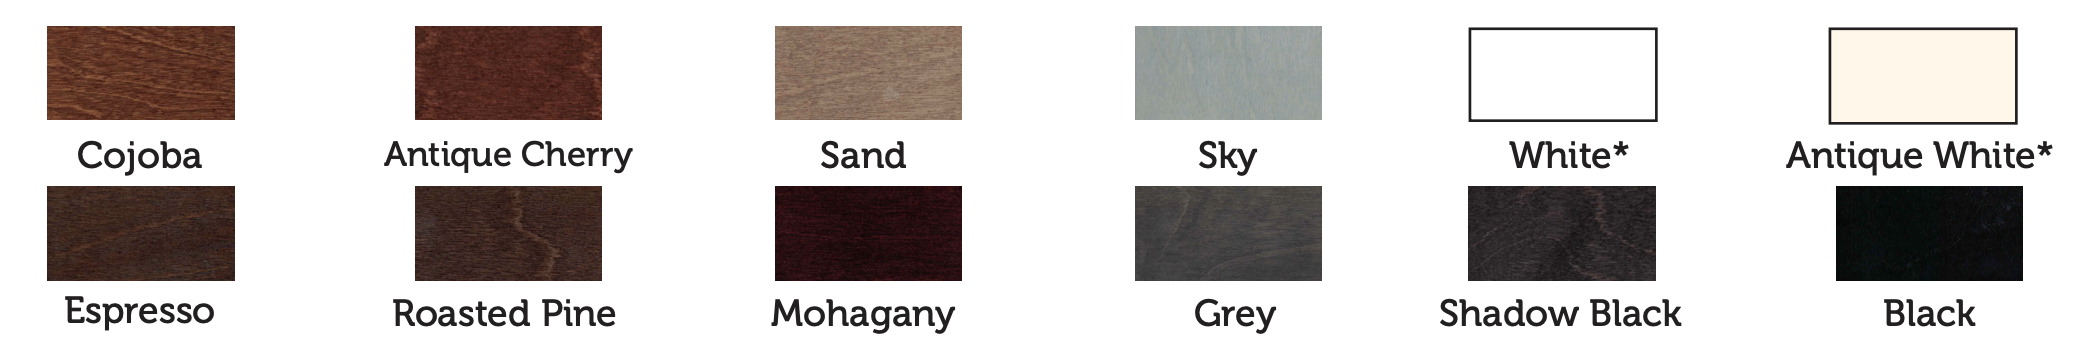 Cabinet Bed Finish Swatches